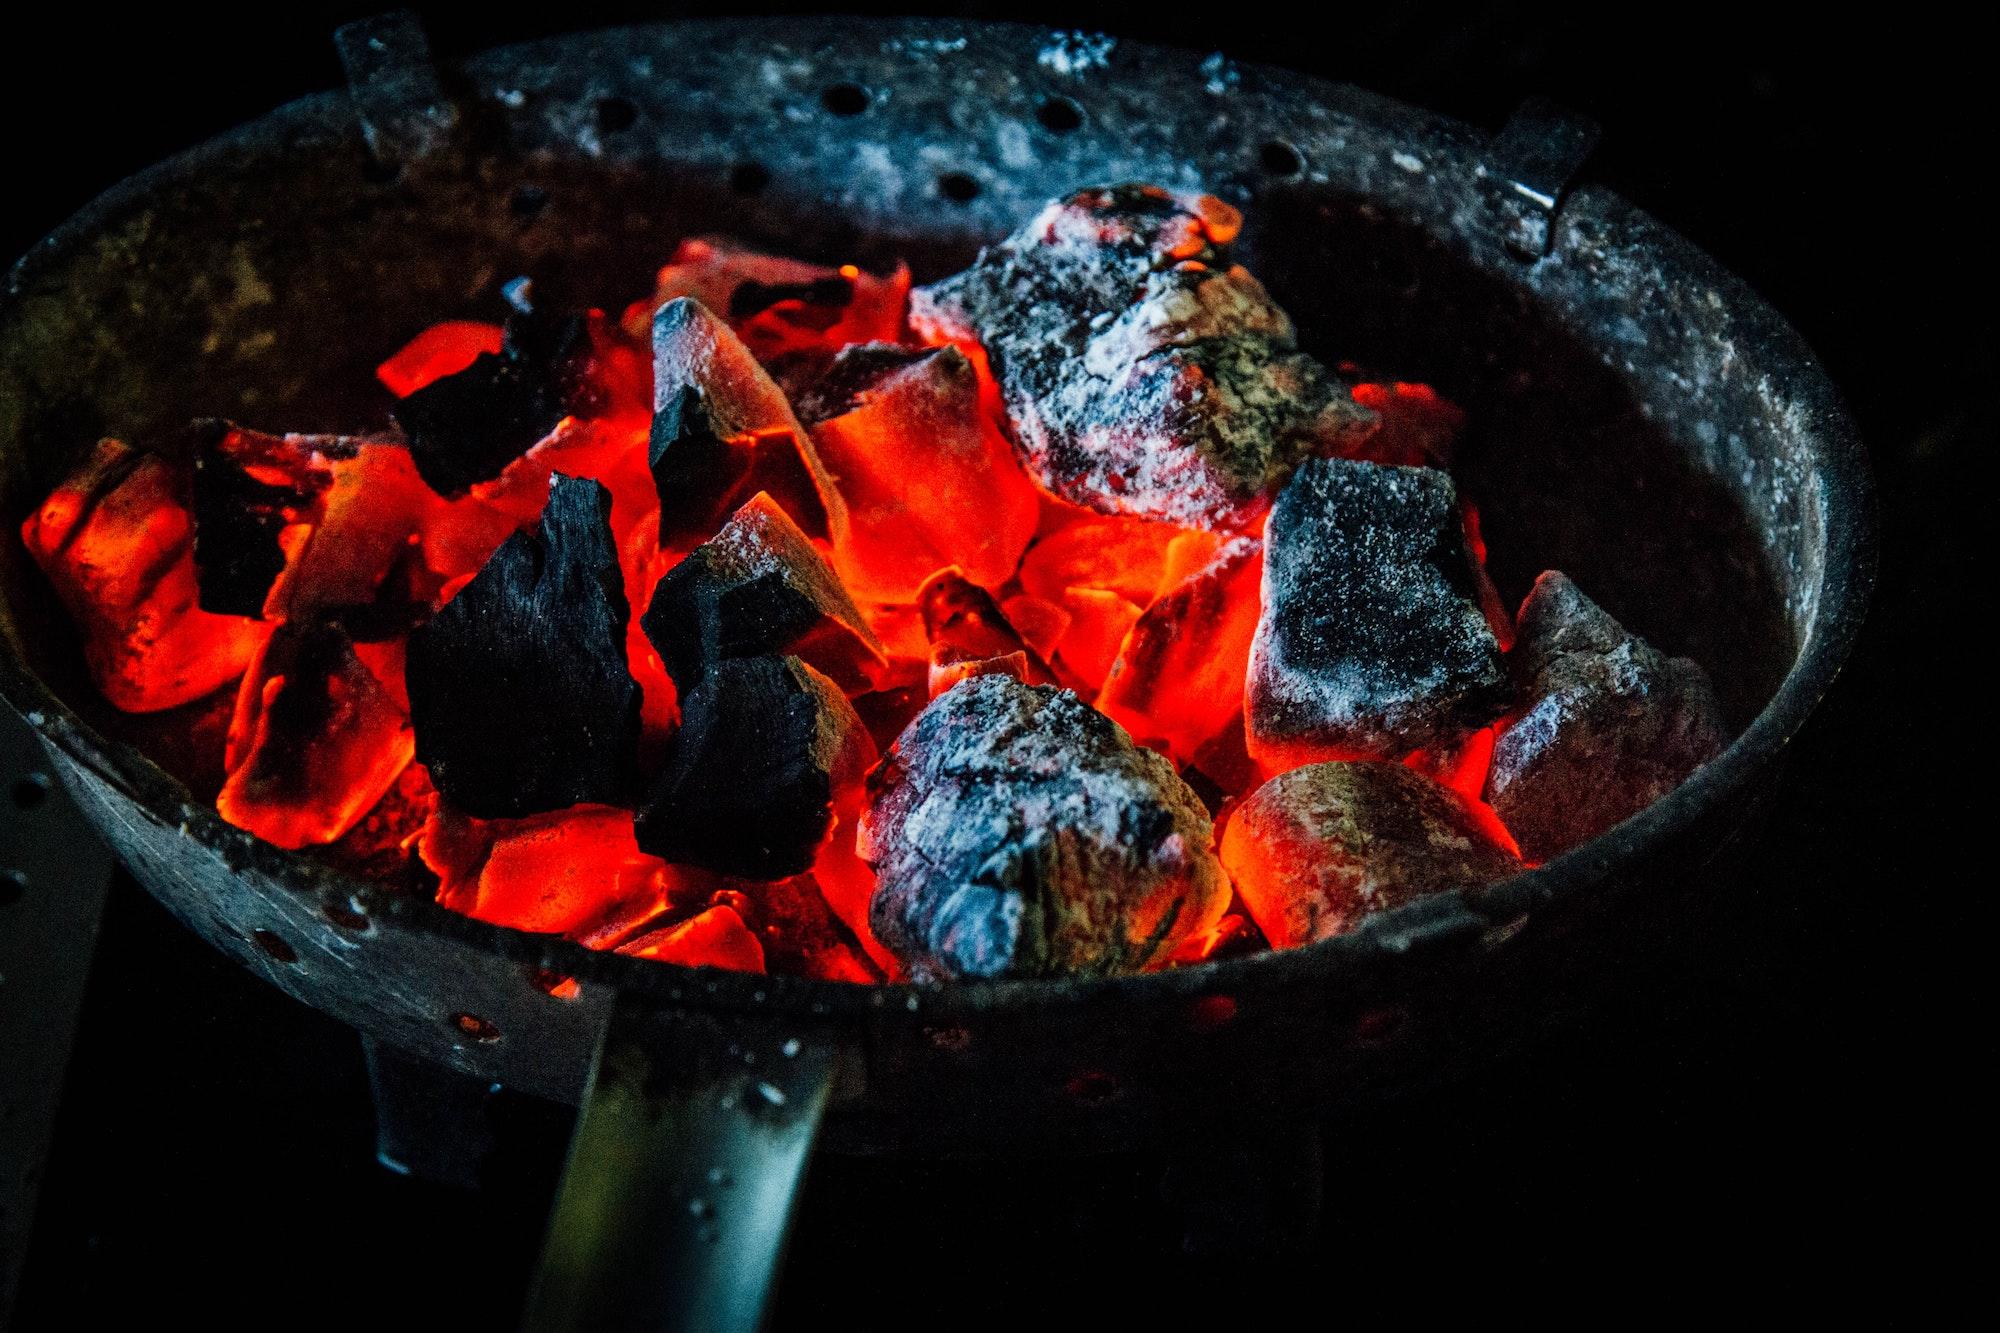 Heaping burning coals on your enemy Featured Image